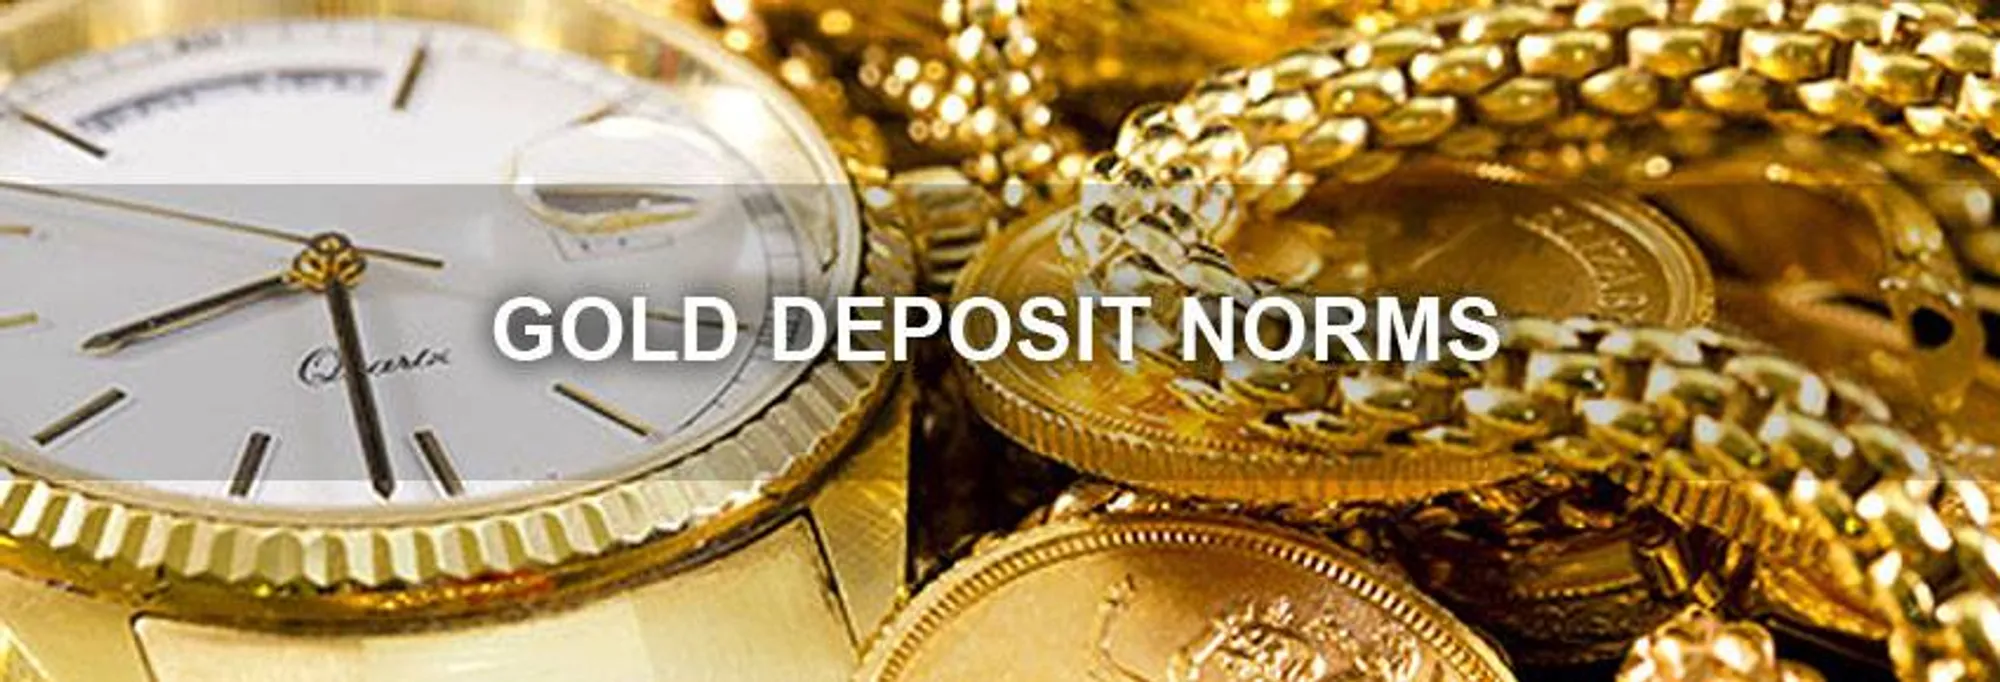 gold-deposit-norms